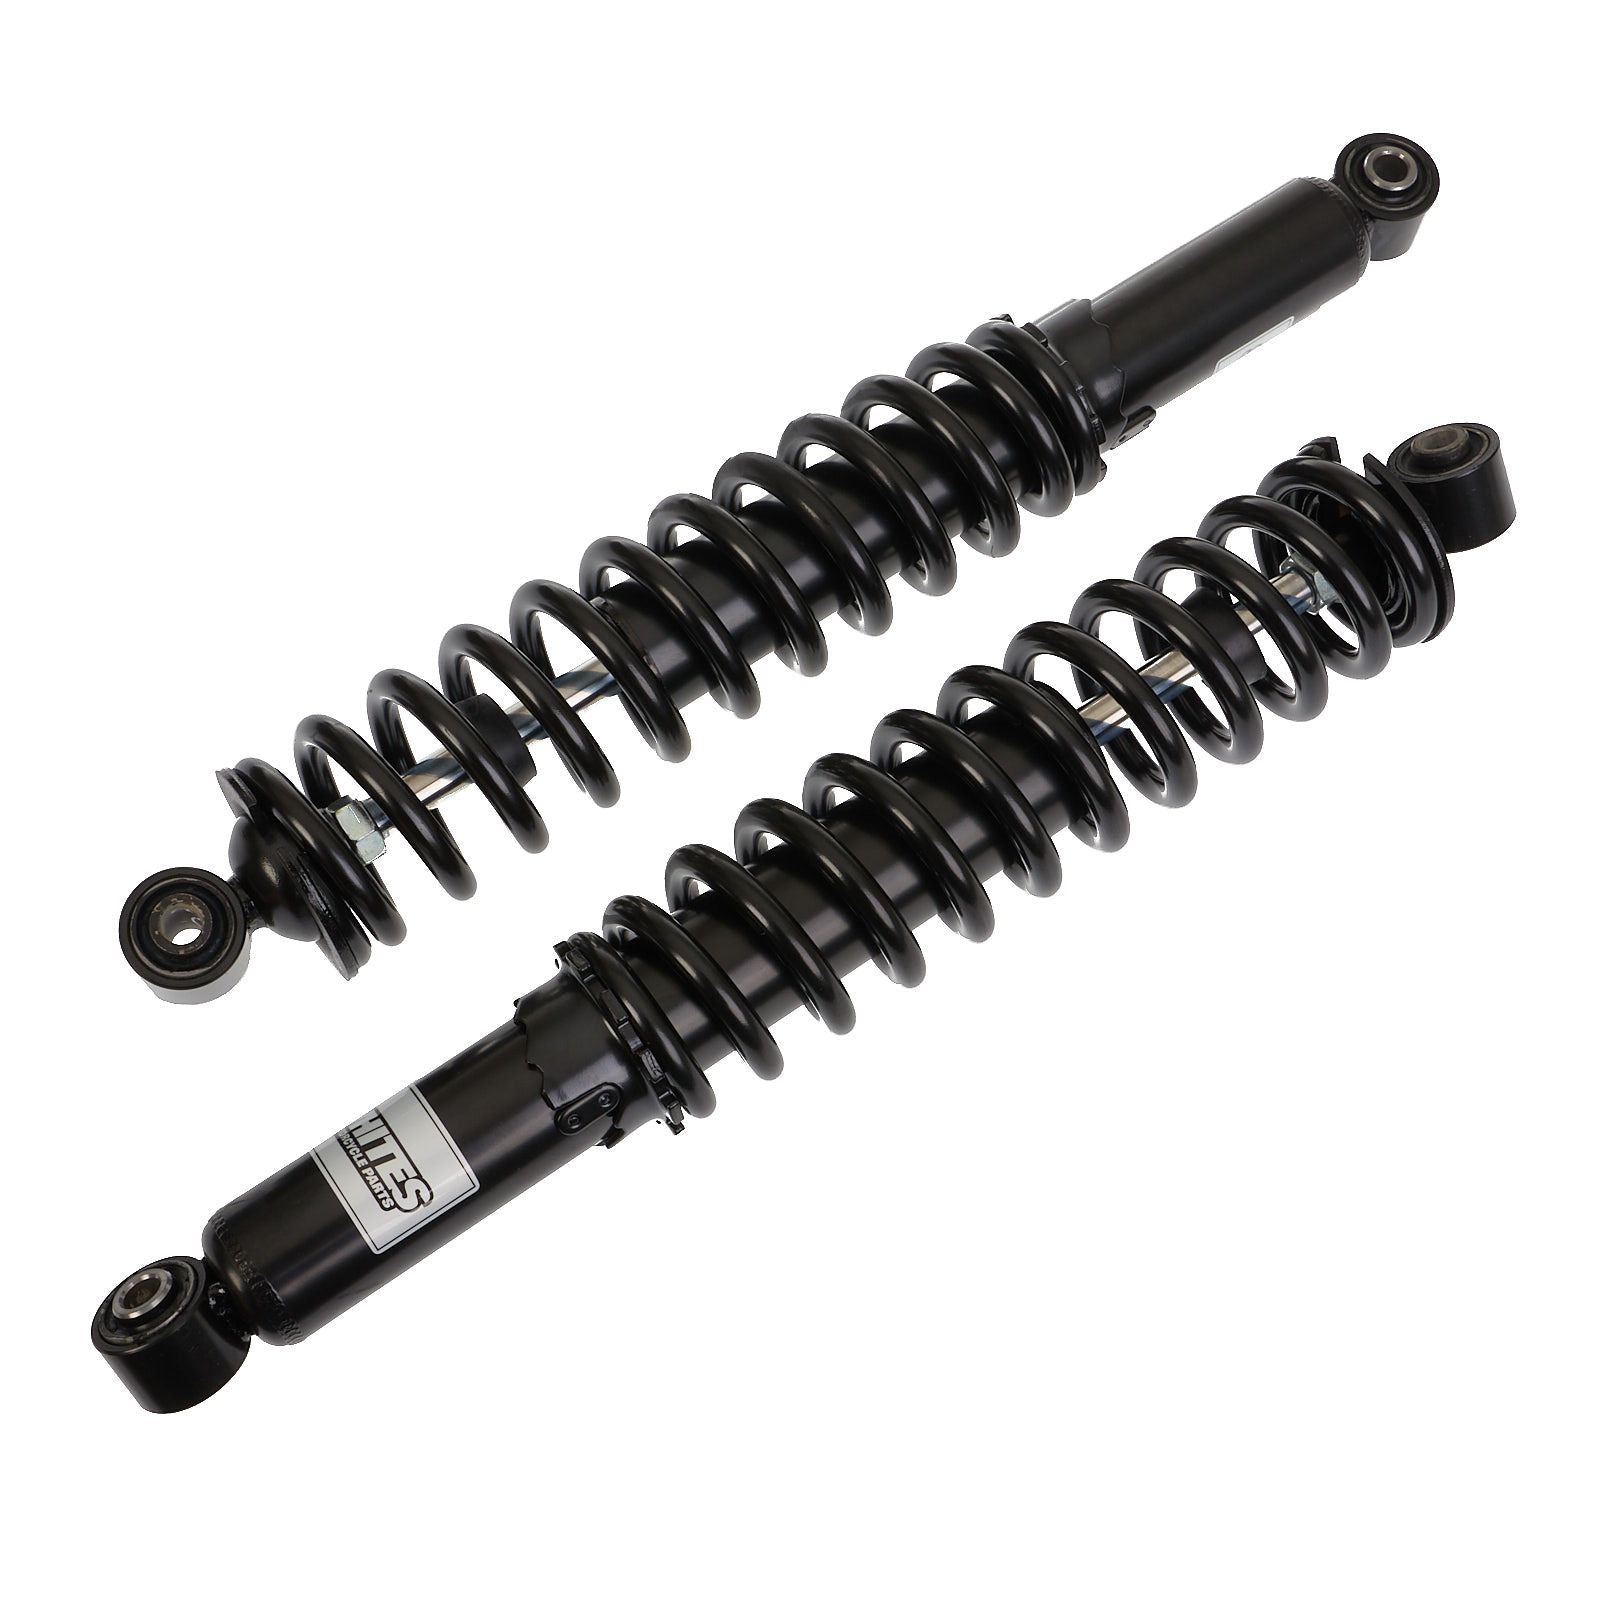 New WHITES Shock Absorbers - Rear For Yamaha Grizzly 700 4Wd #WPSA010